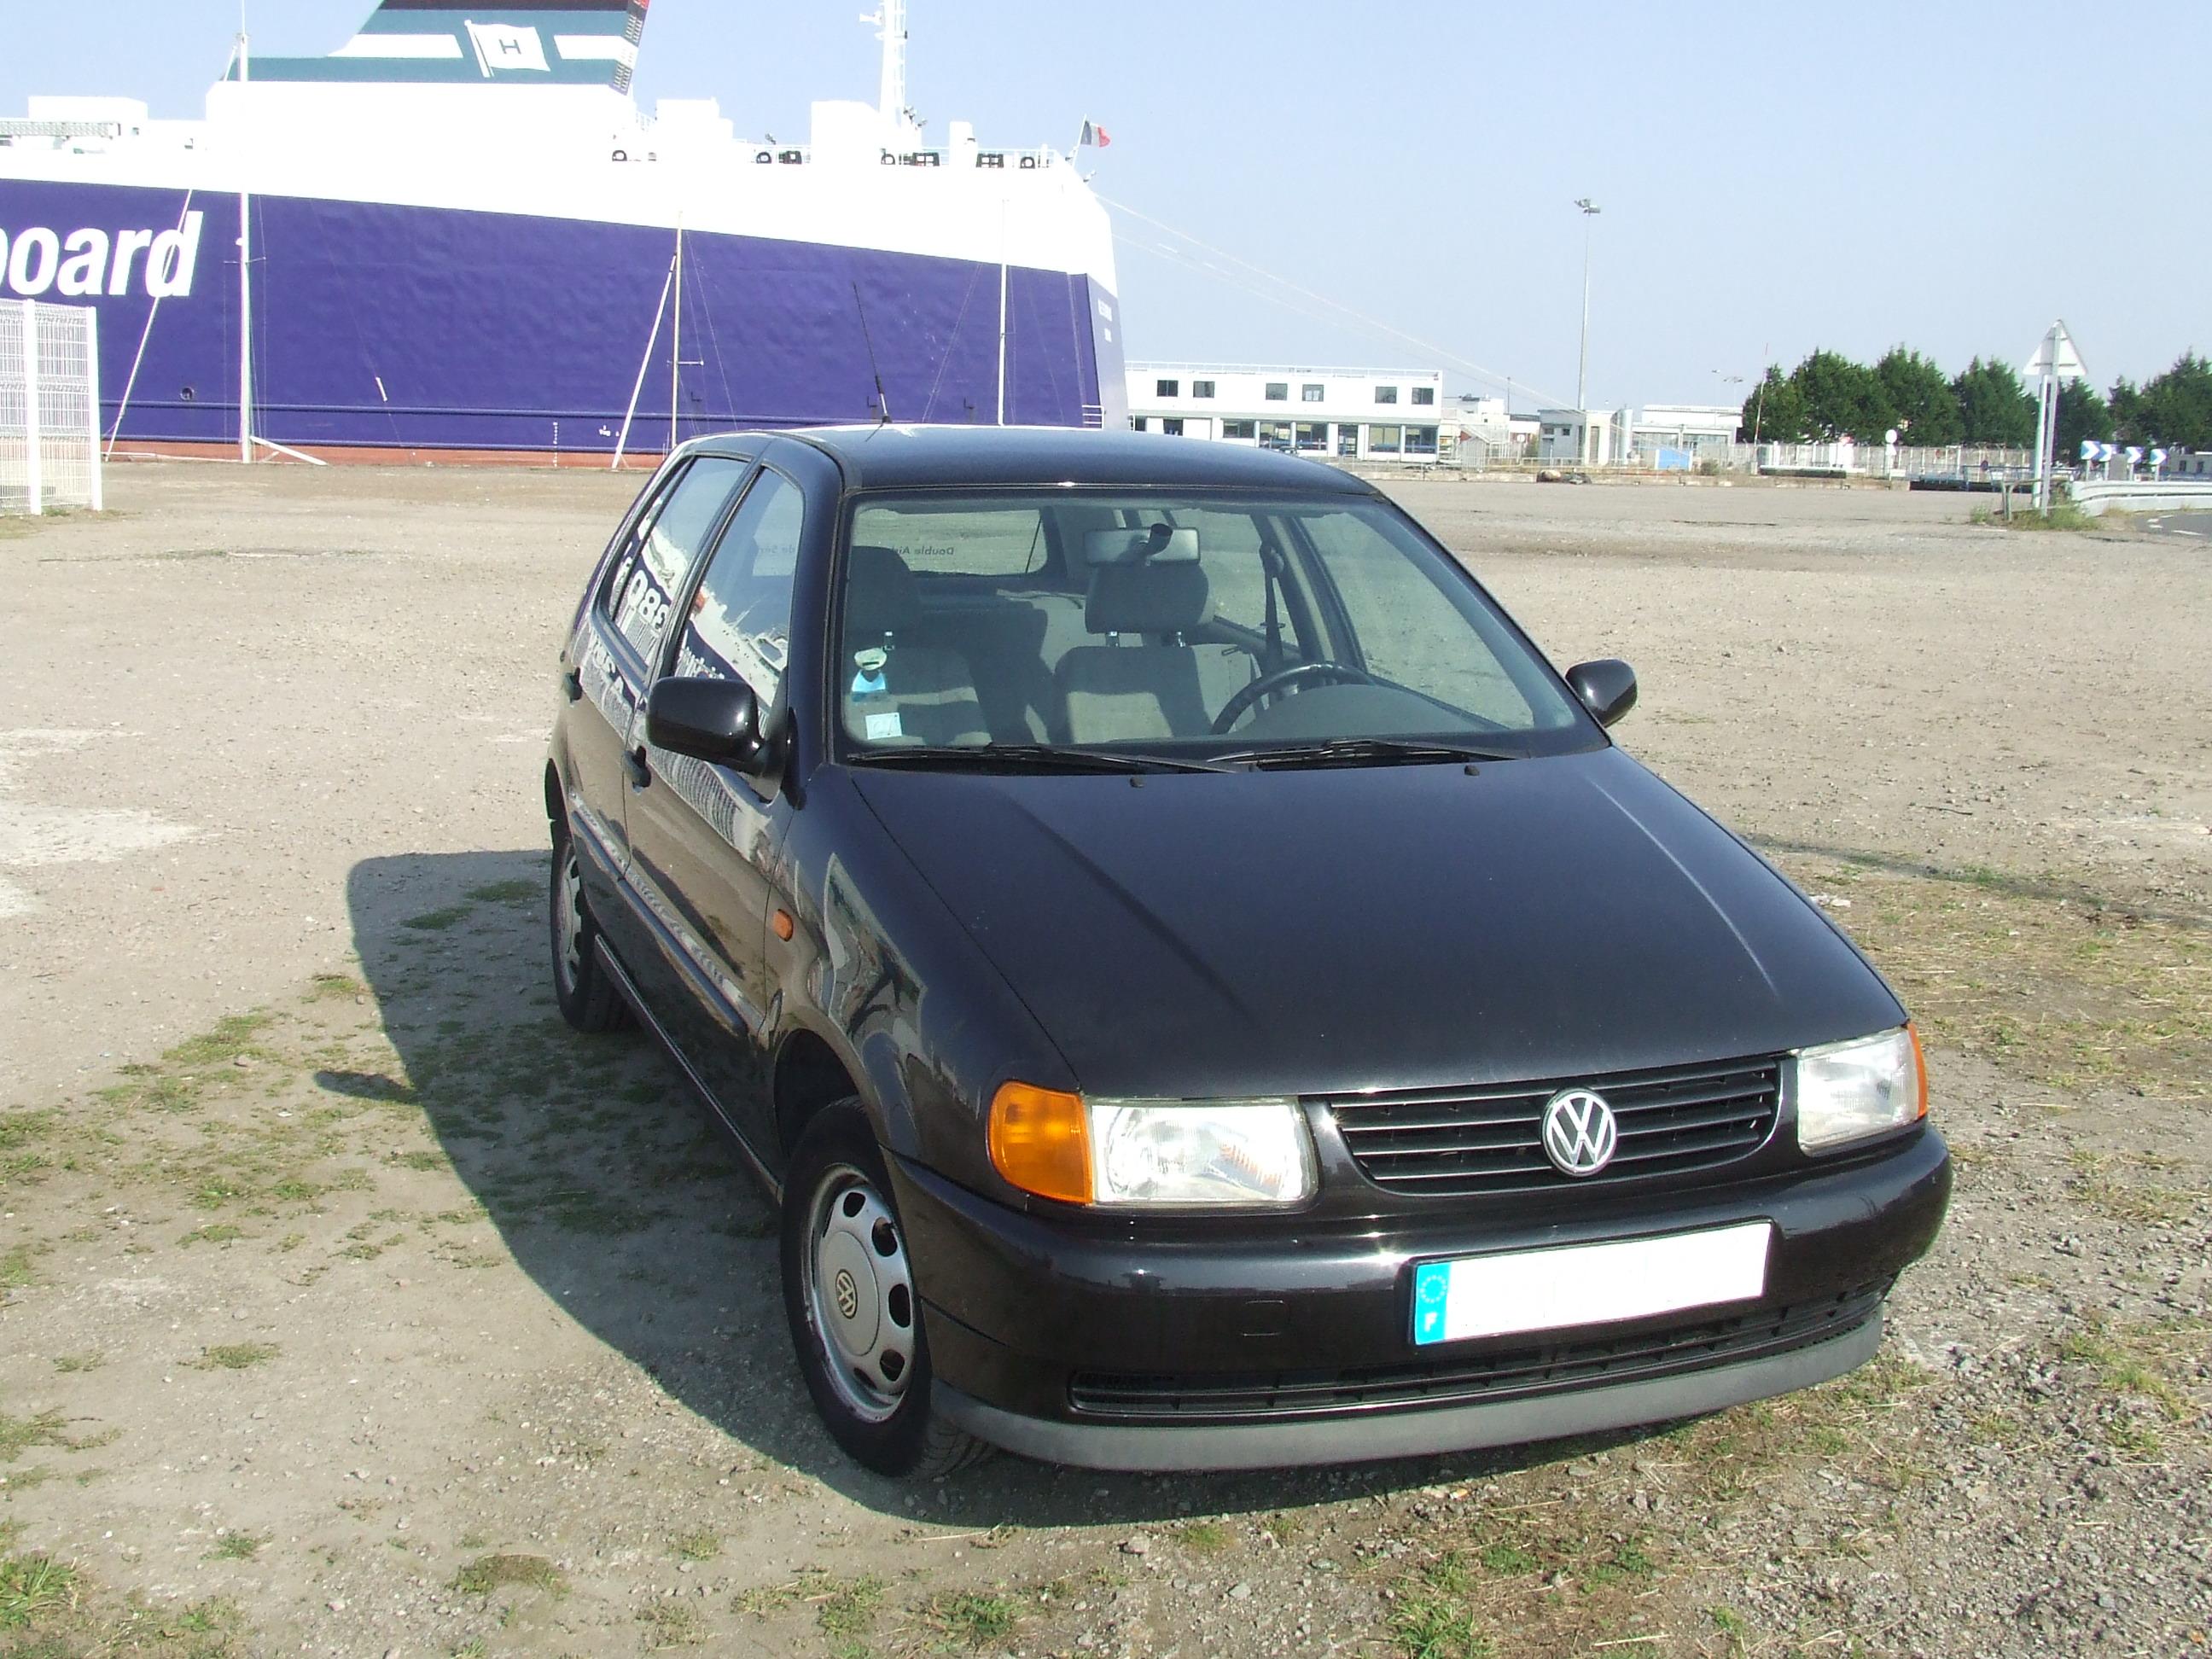 Volkswagen Polo 1998 Review, Amazing Pictures and Images